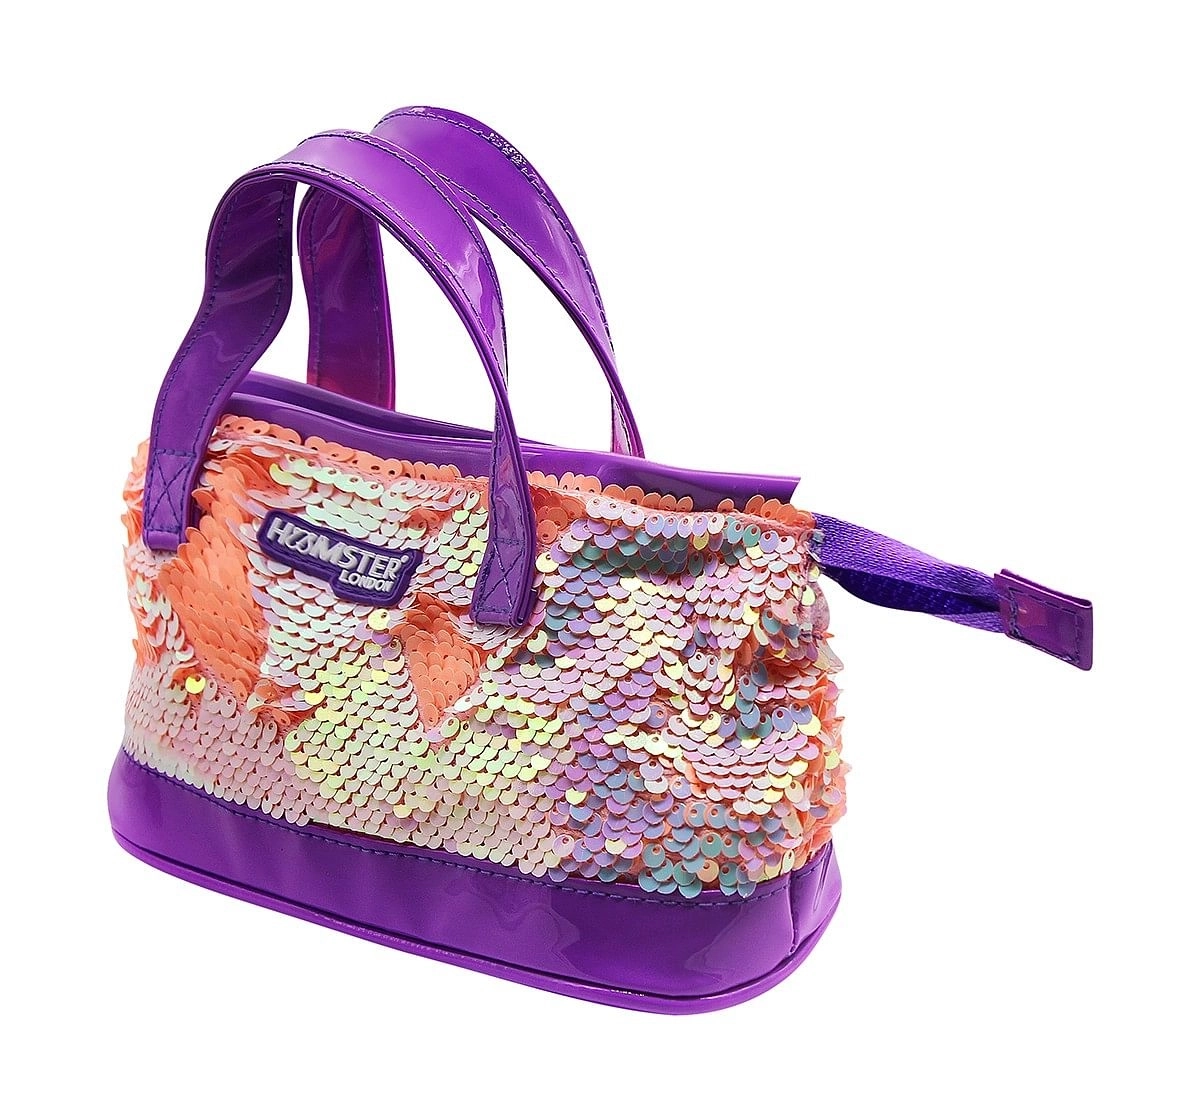 Hamster London Mini Sequin Bag with Handle for age 3Y+ (Orange-Purple)